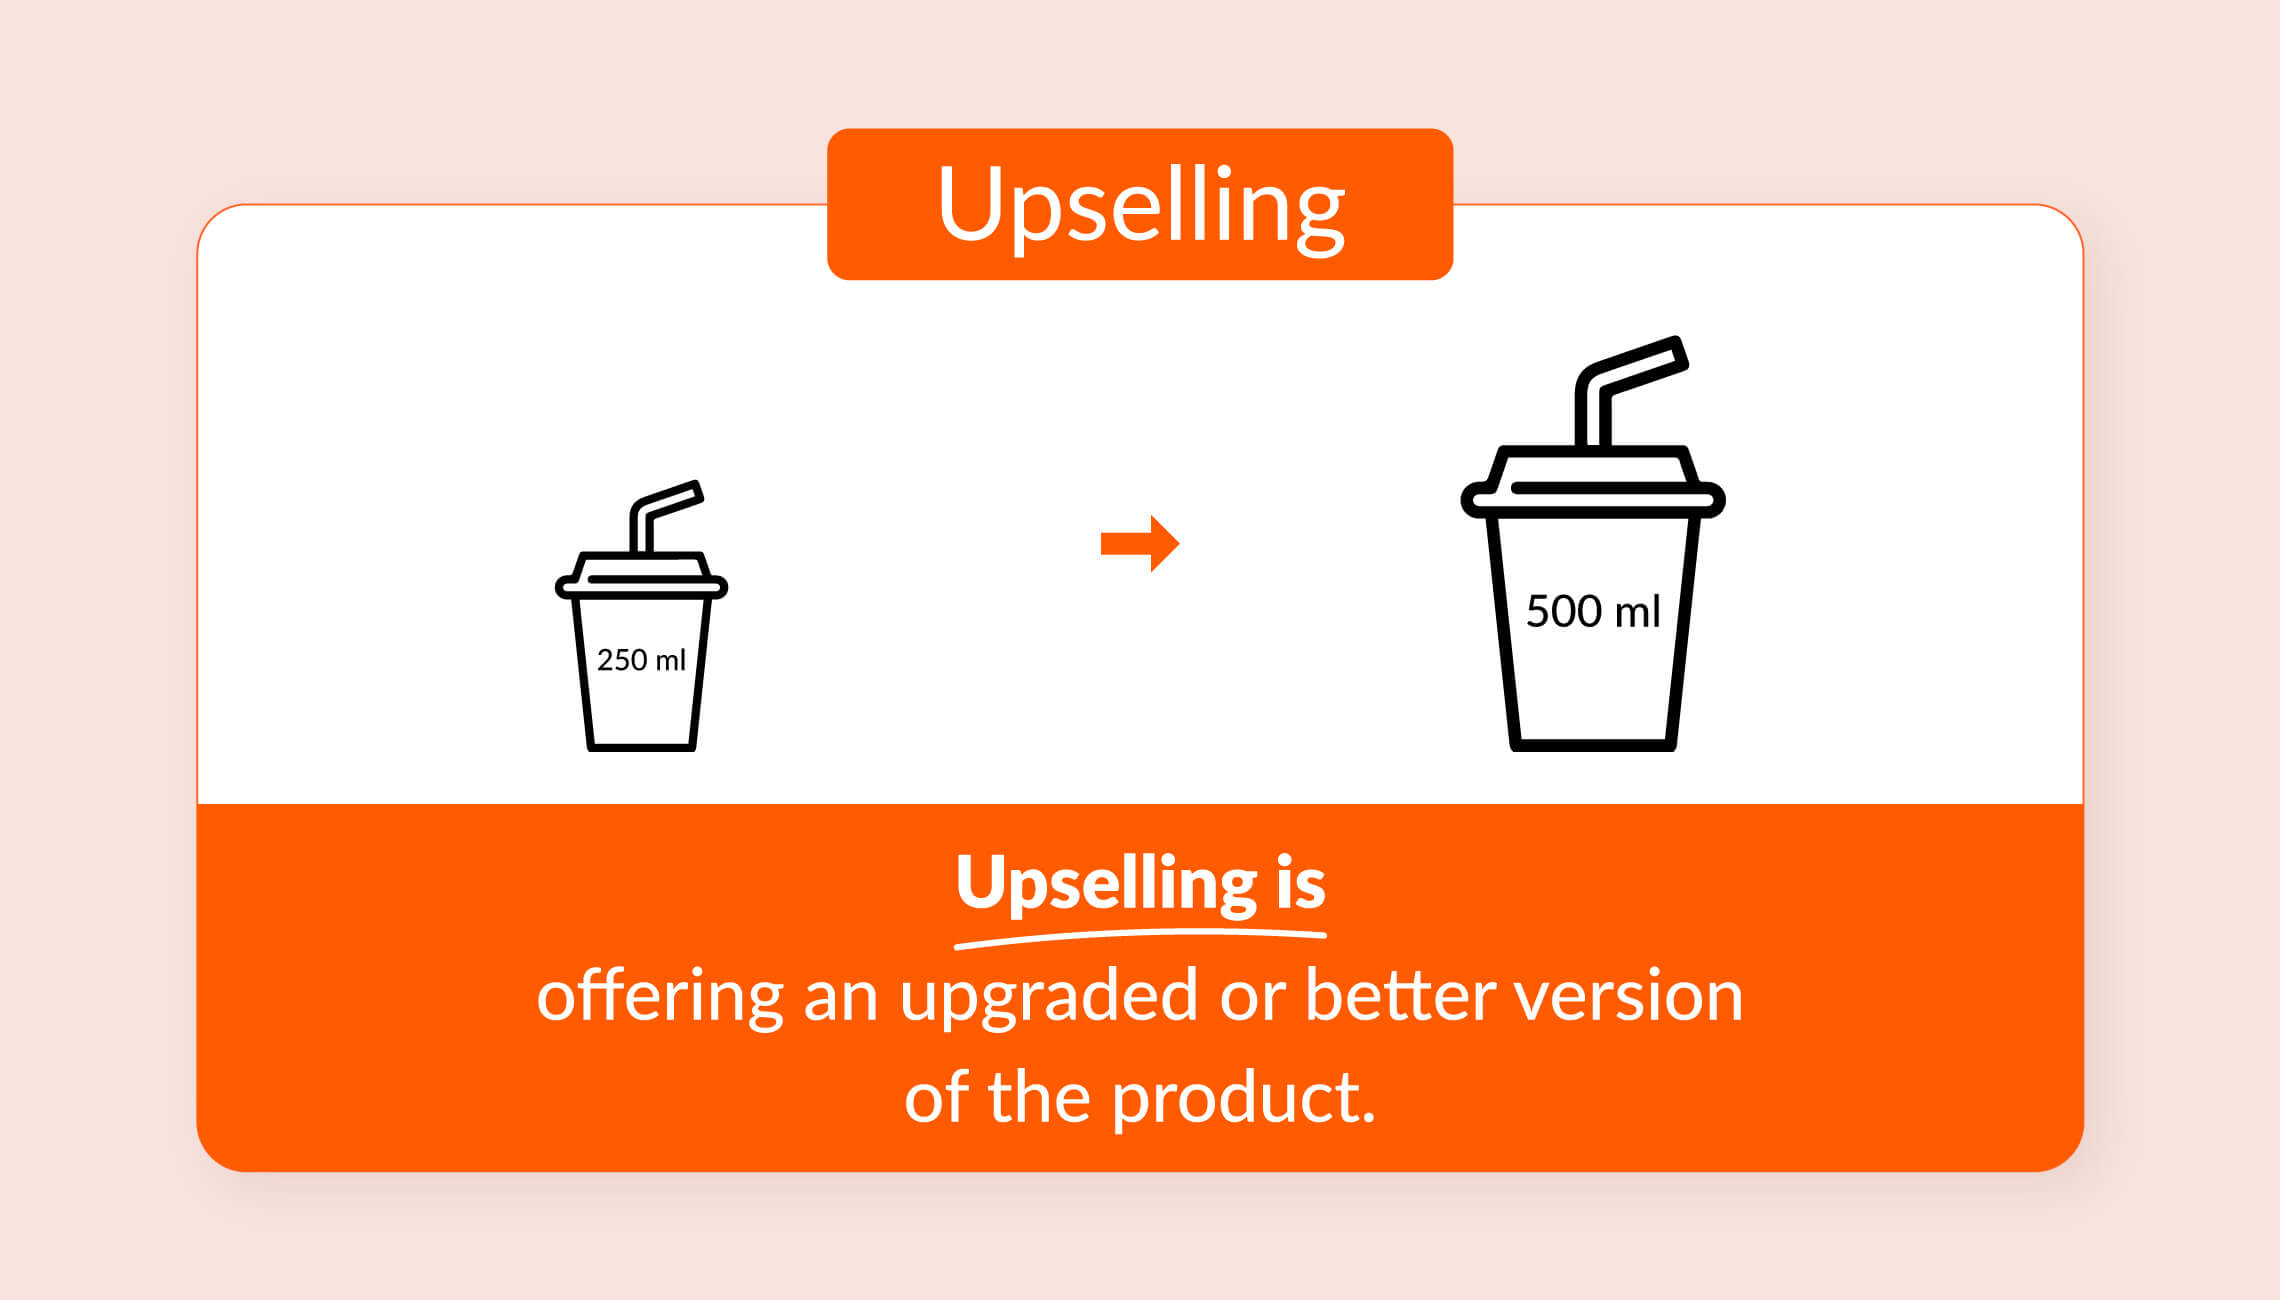 What is Upselling?